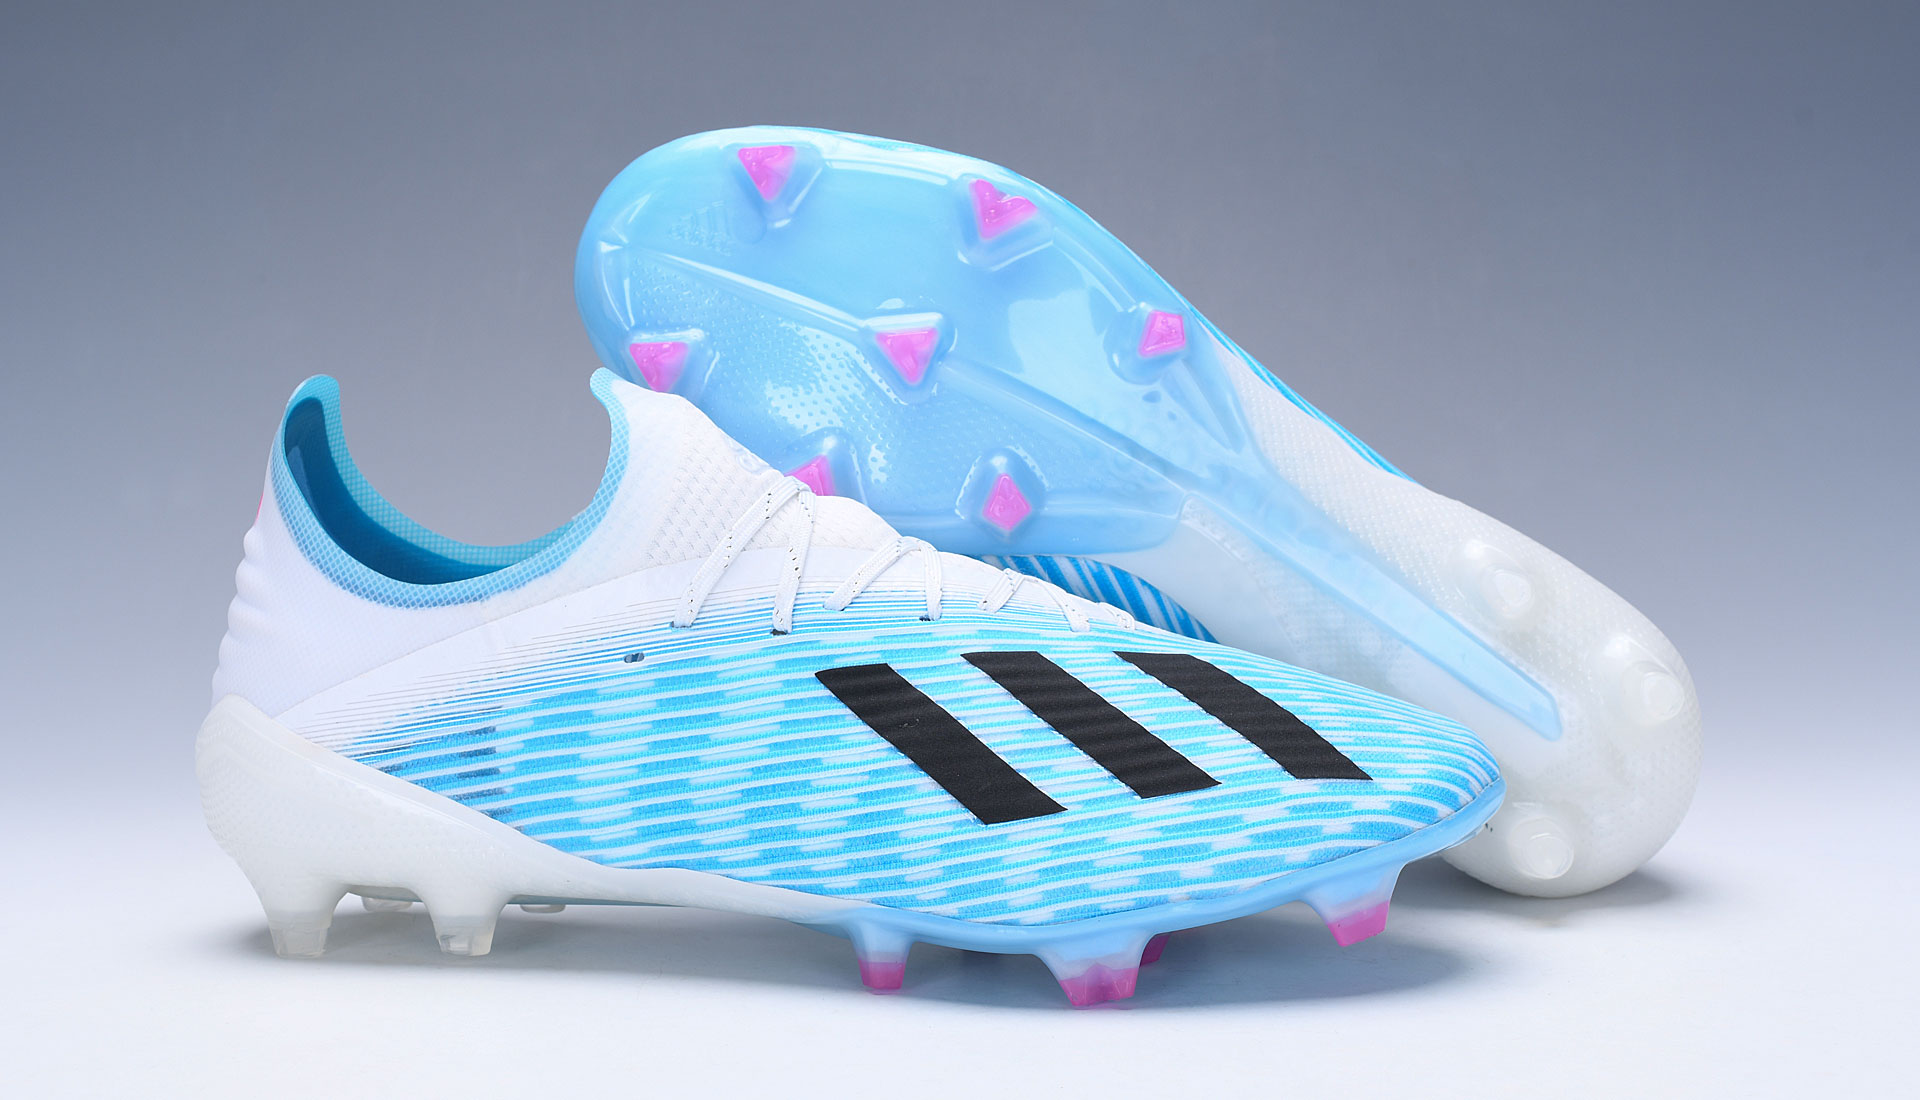 Adidas X 19.1 FG Bright Cyan Black Football Boots: Lightweight Speed and Precision | Free Shipping